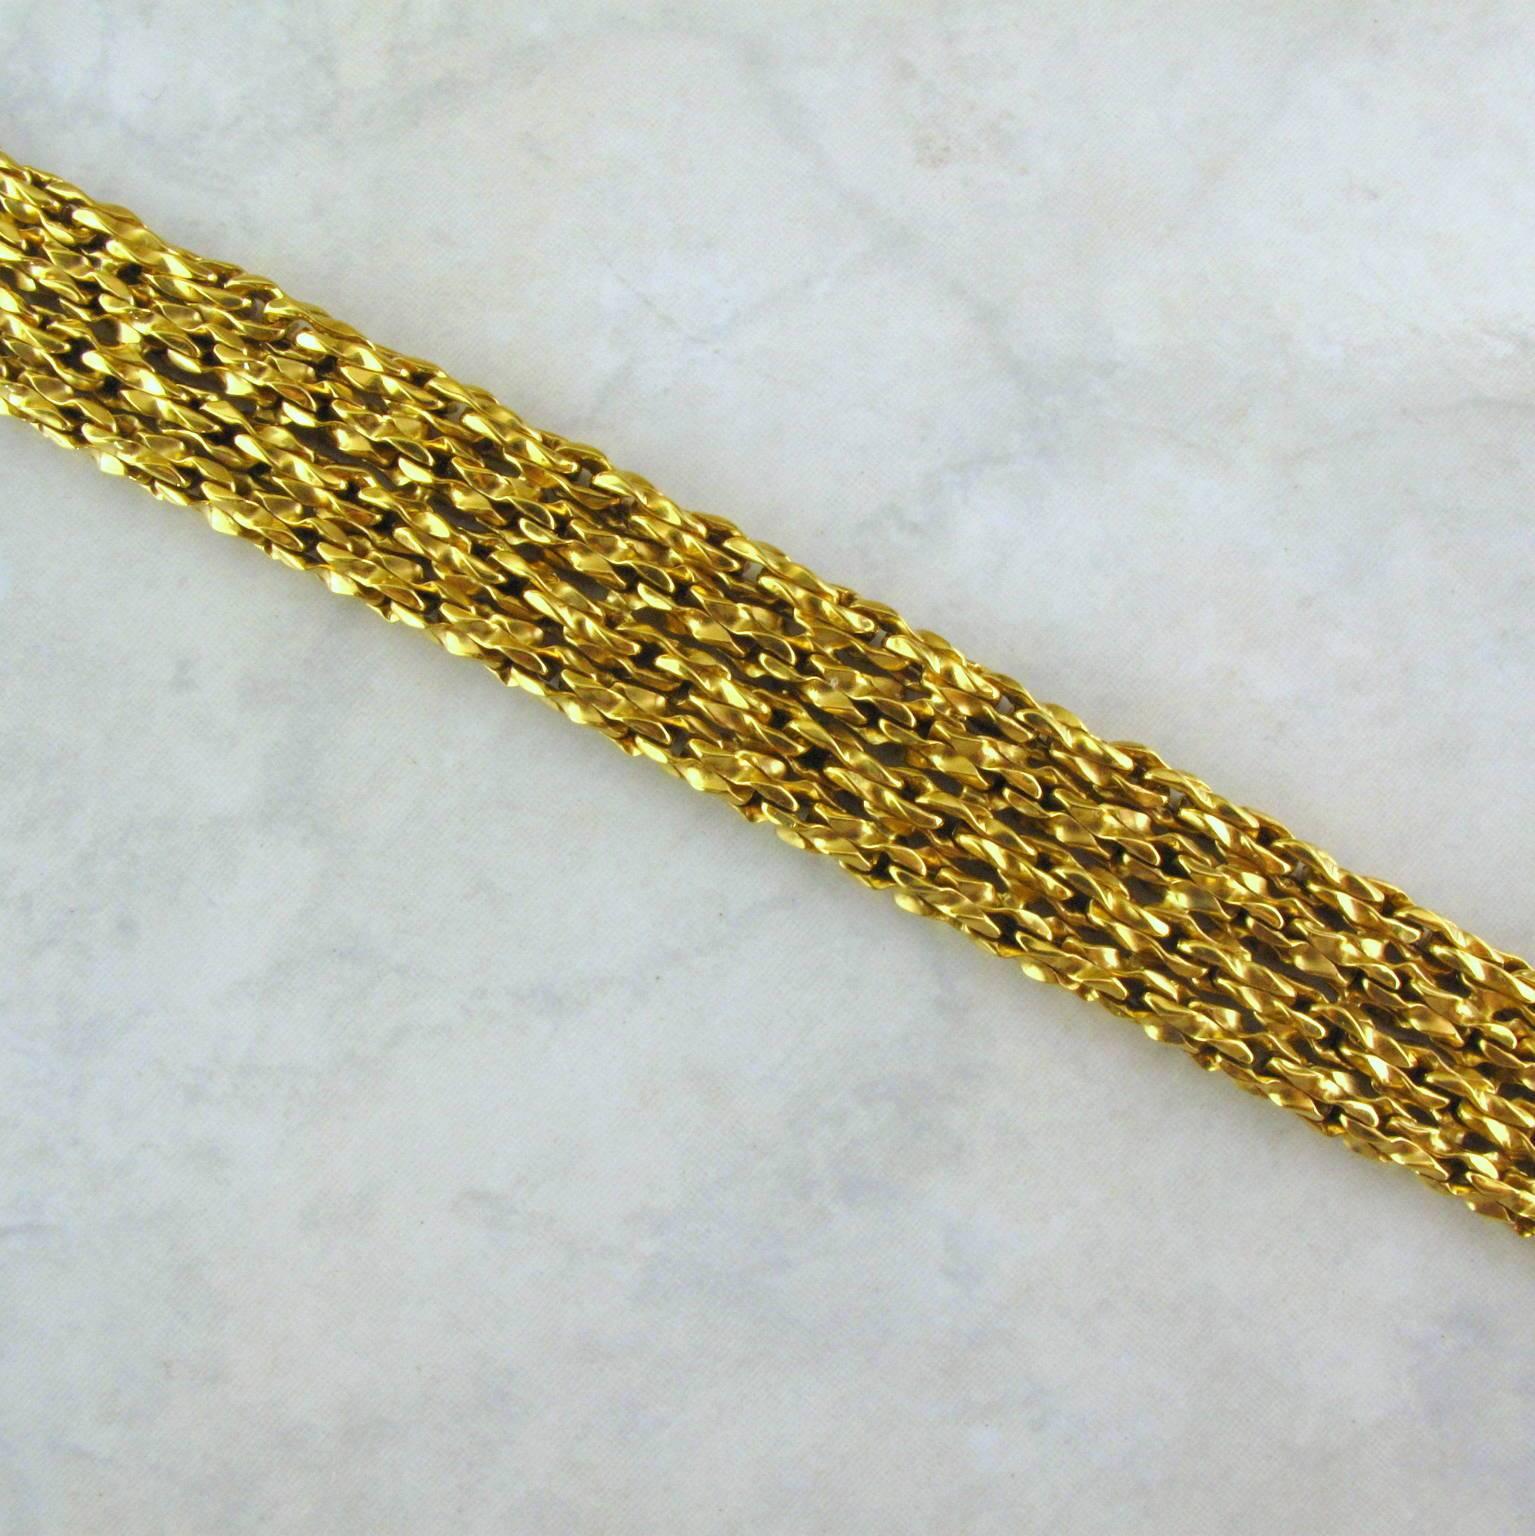 Tiffany and Co. 18 karat yellow gold  woven link bracelet.
Four rows of open woven link with rich gold color, the mid-century bracelet is stamped 750 Tiffany and Co. W Germany.


